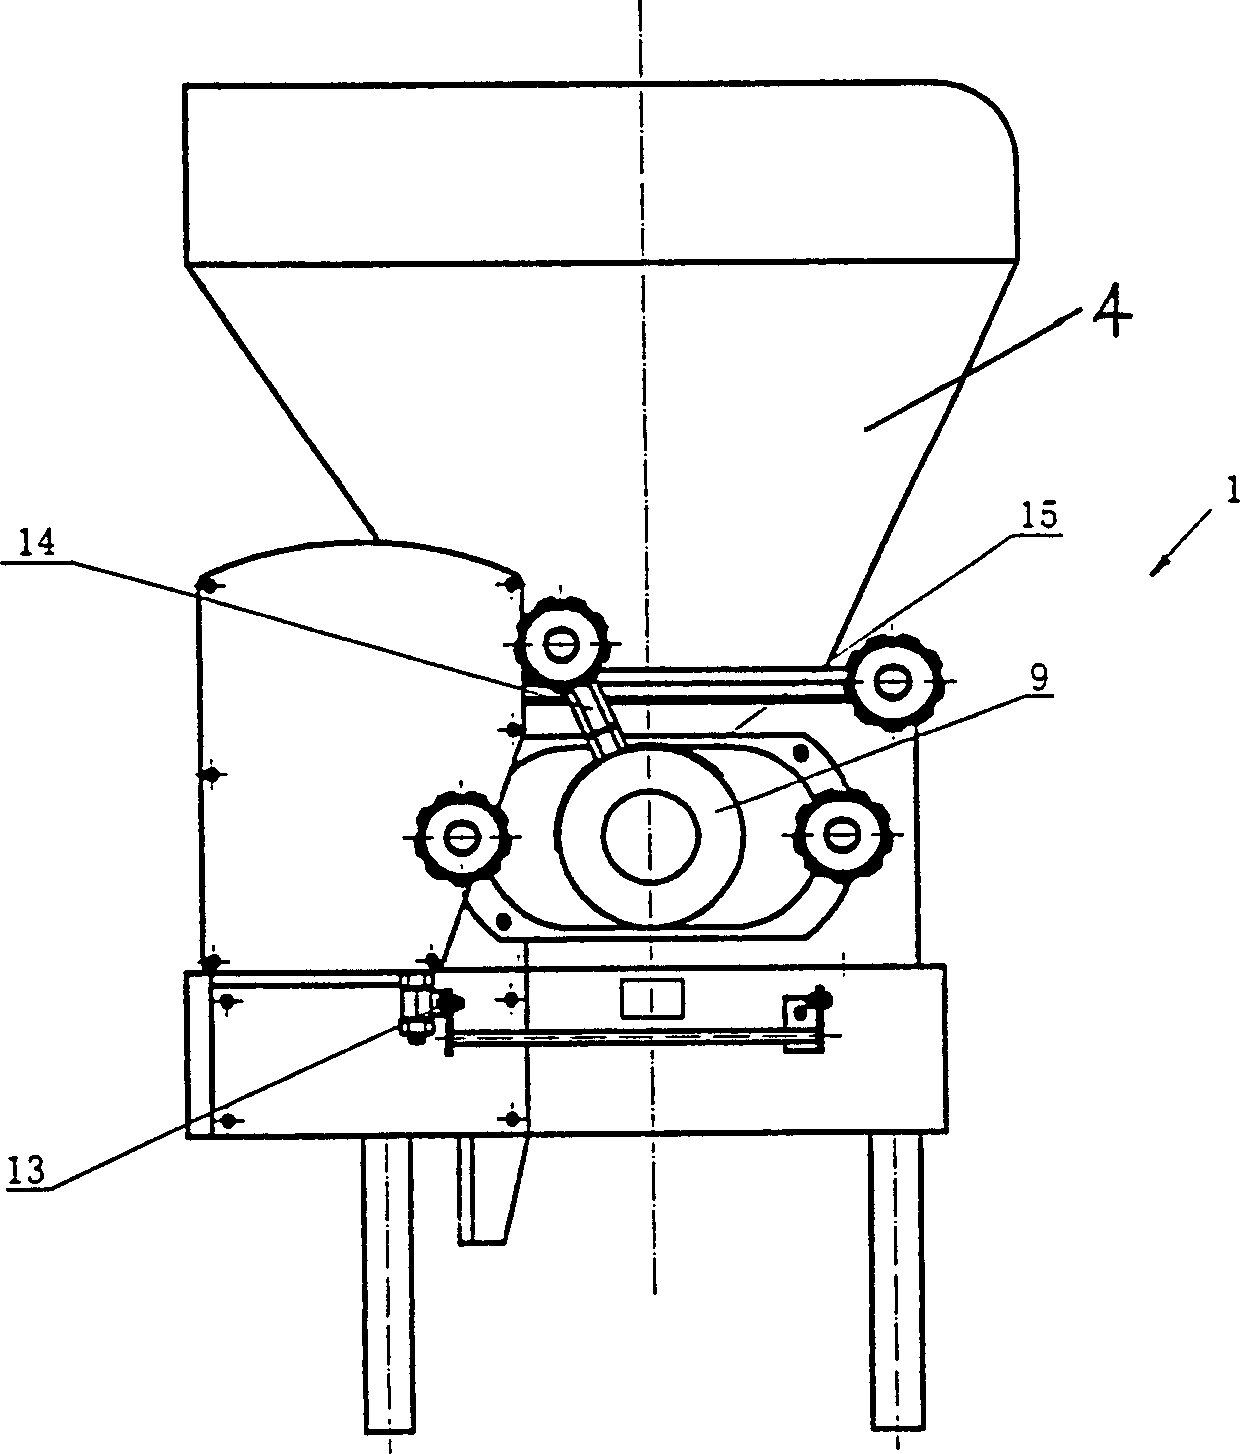 Bread cutting and forming apparatus